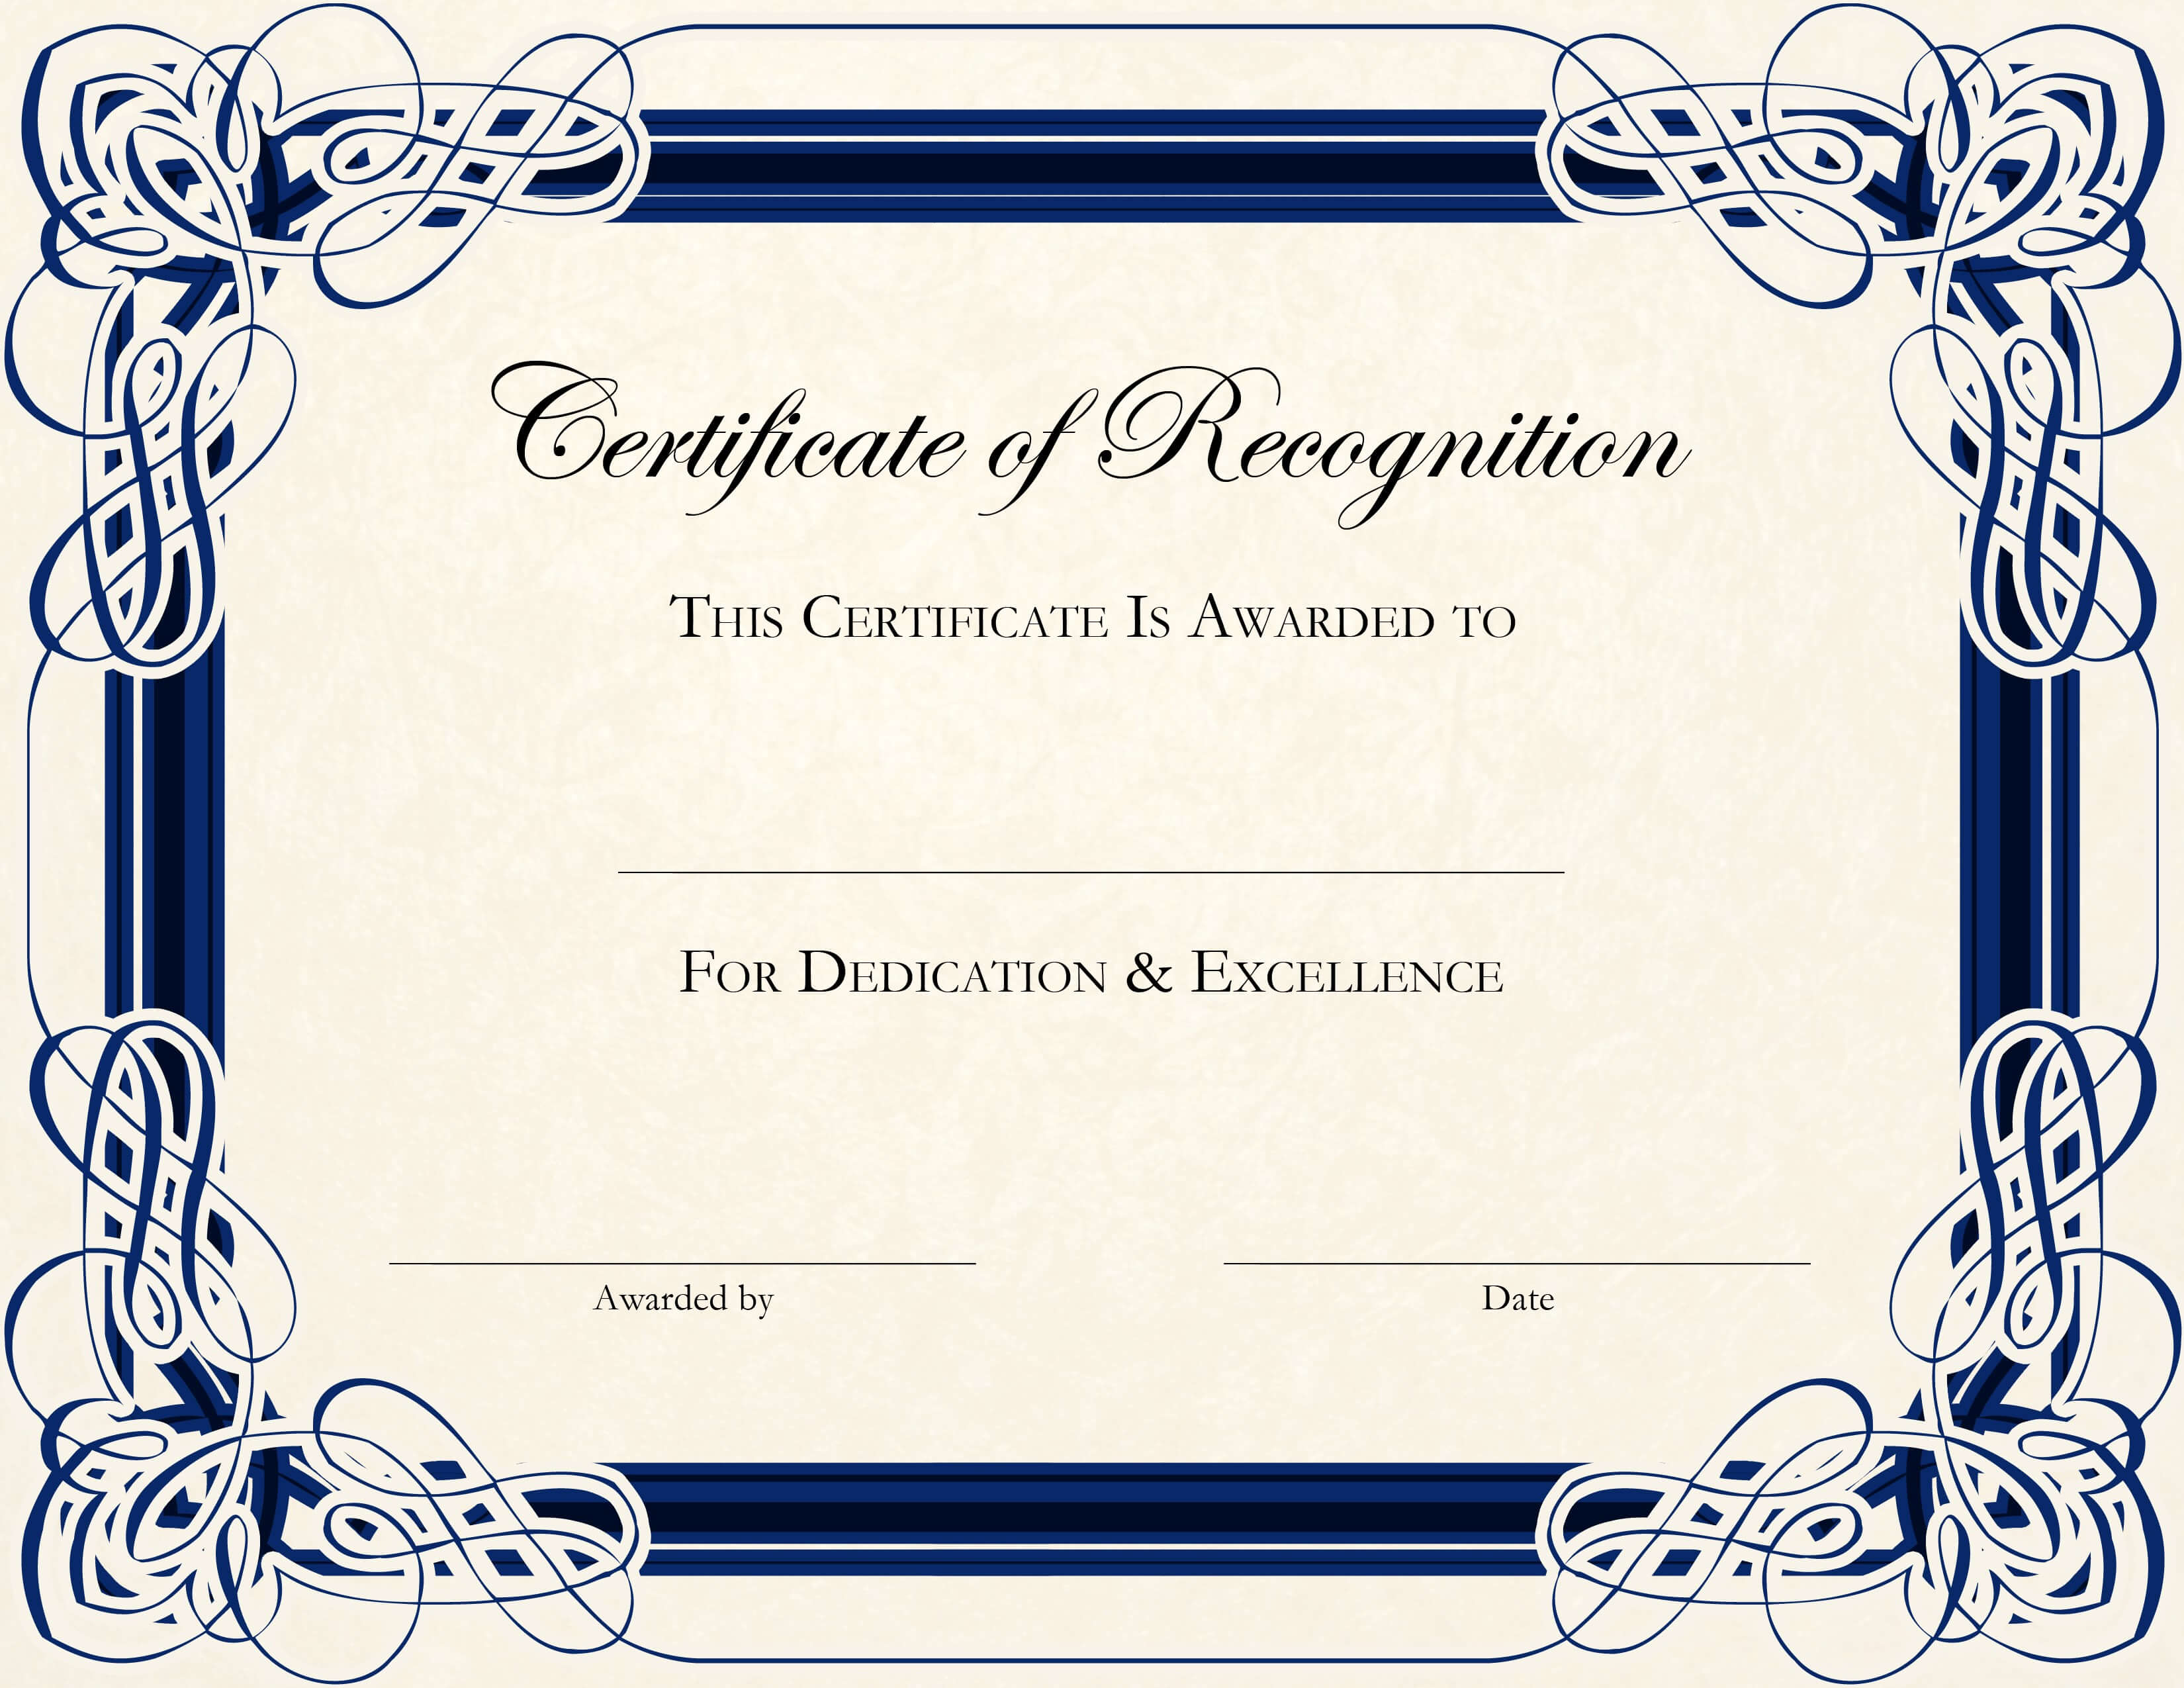 Sample Blank Certificate Of Recognition Best Award With Regard To Downloadable Certificate Templates For Microsoft Word